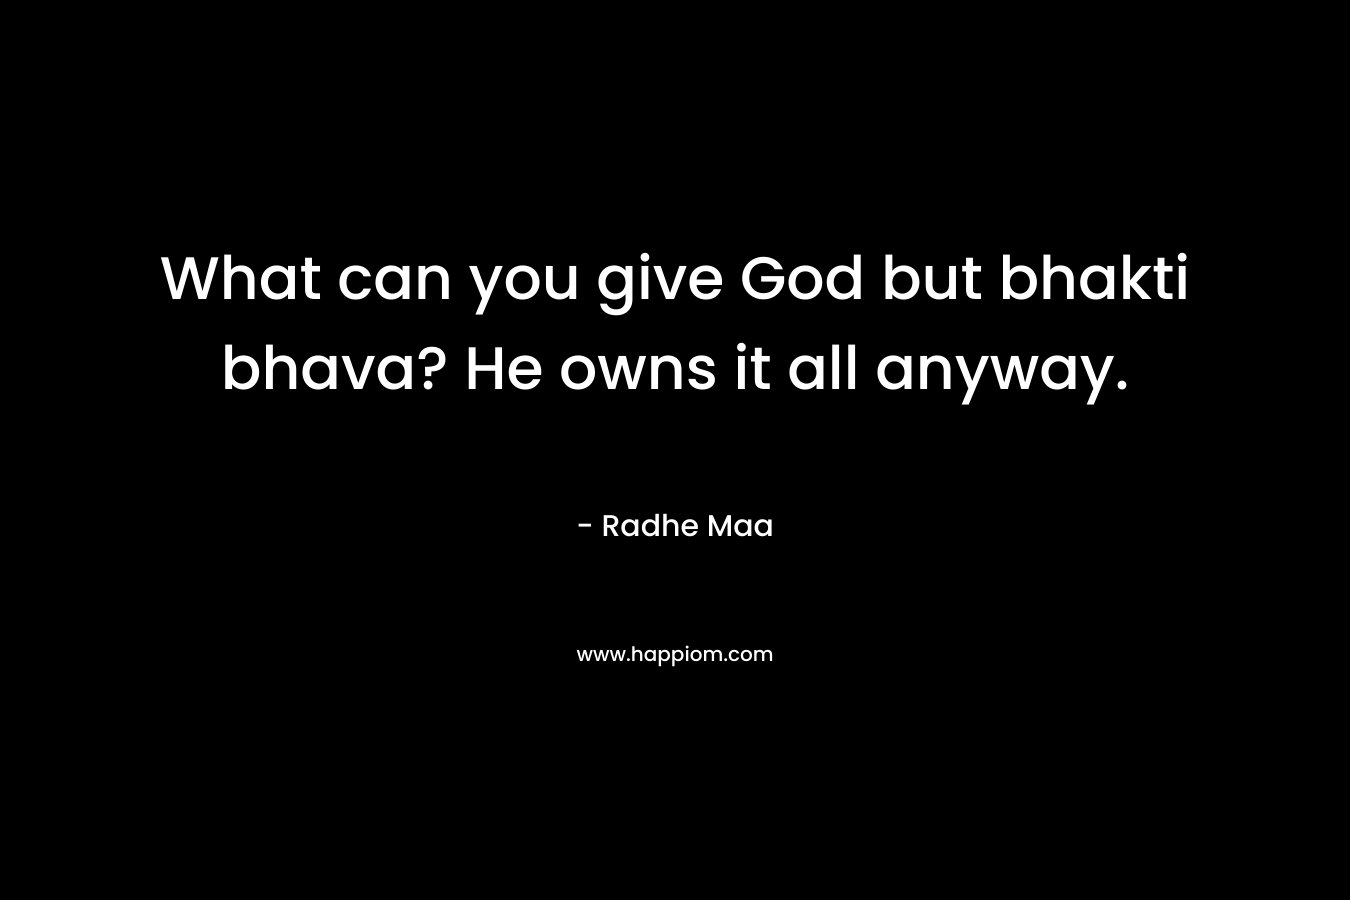 What can you give God but bhakti bhava? He owns it all anyway.